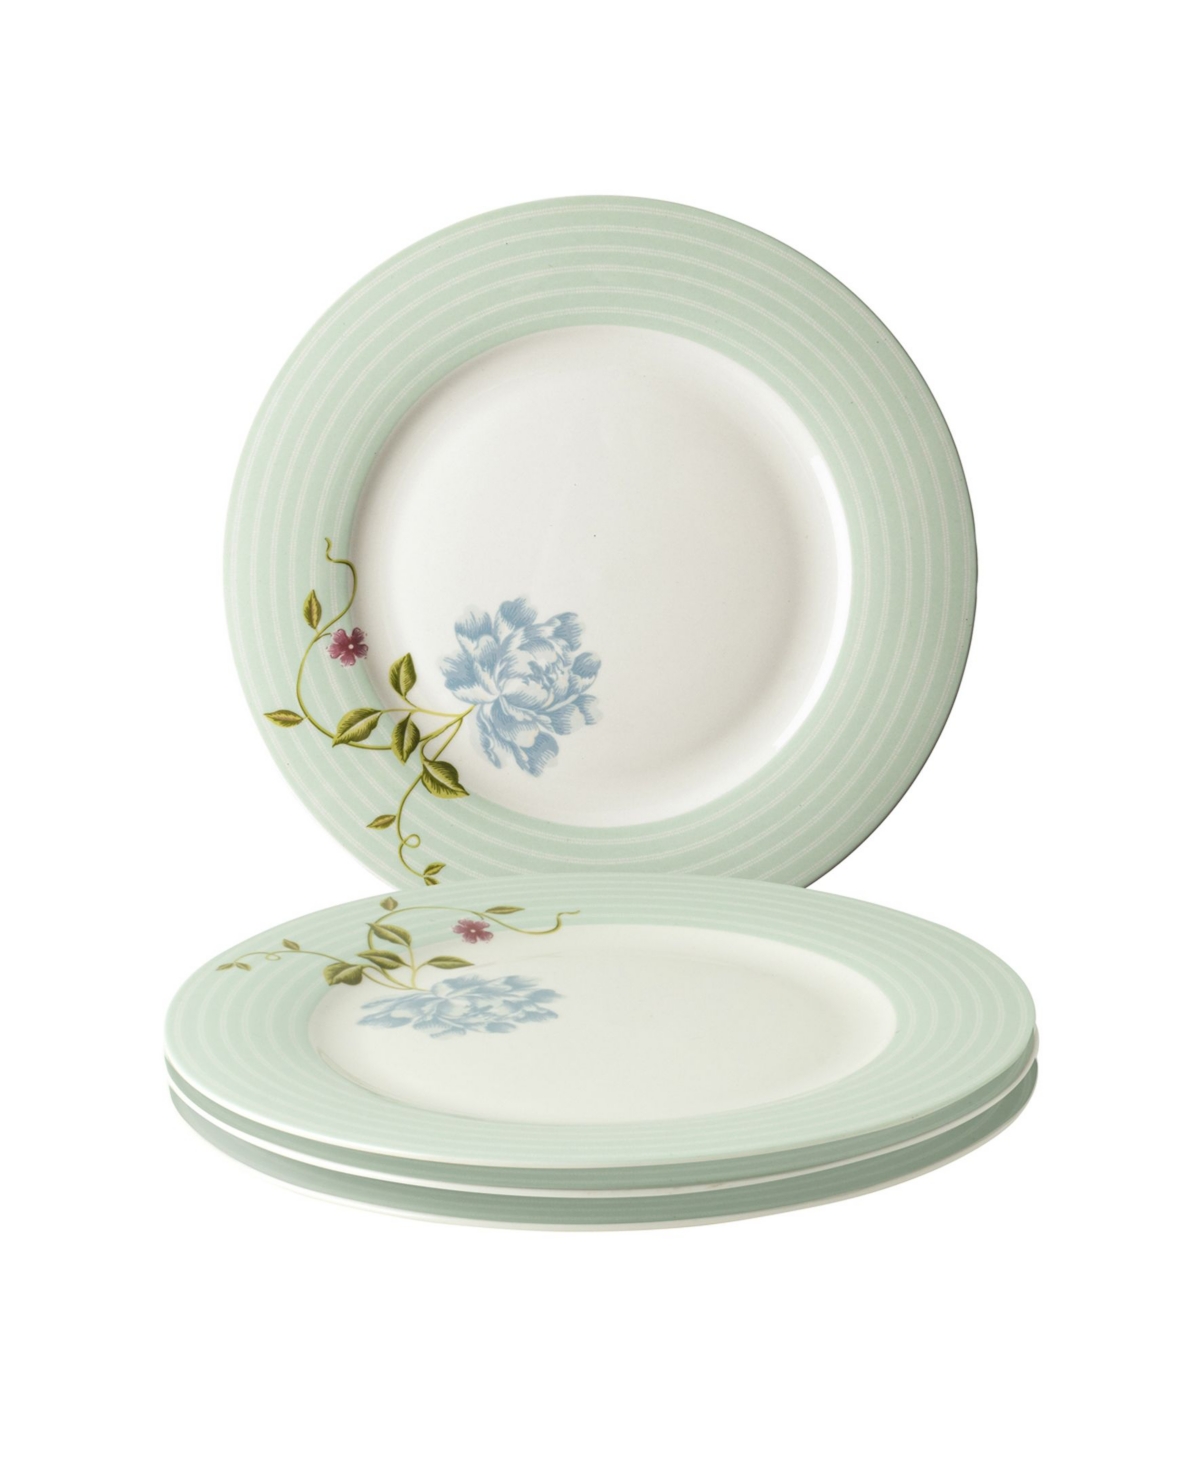 LAURA ASHLEY HERITAGE COLLECTABLES MINT CANDY PLATES IN GIFT BOX, SET OF 4